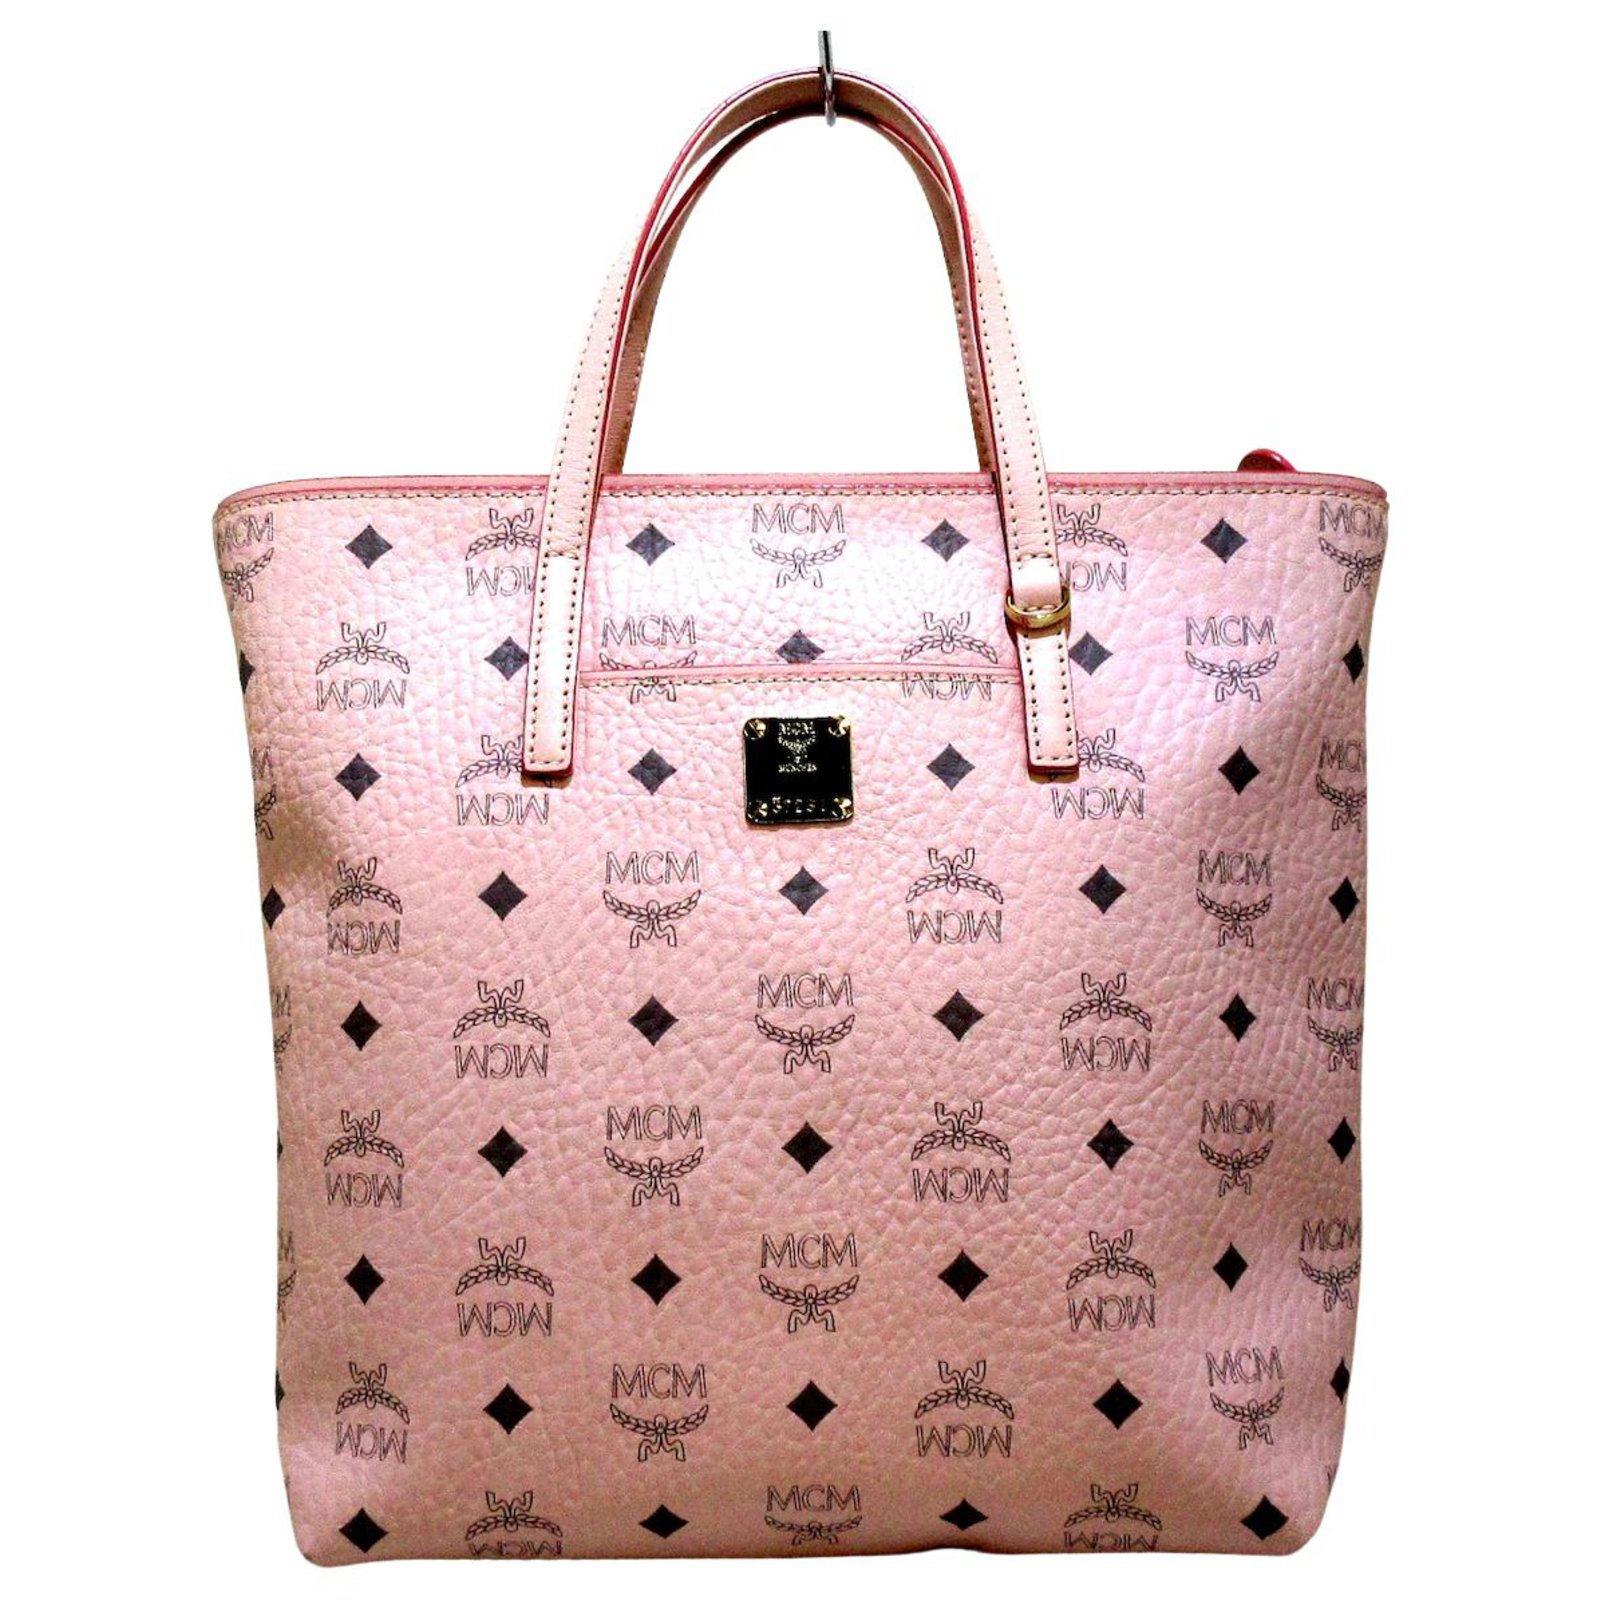 Women's Small Tote Bag by Mcm